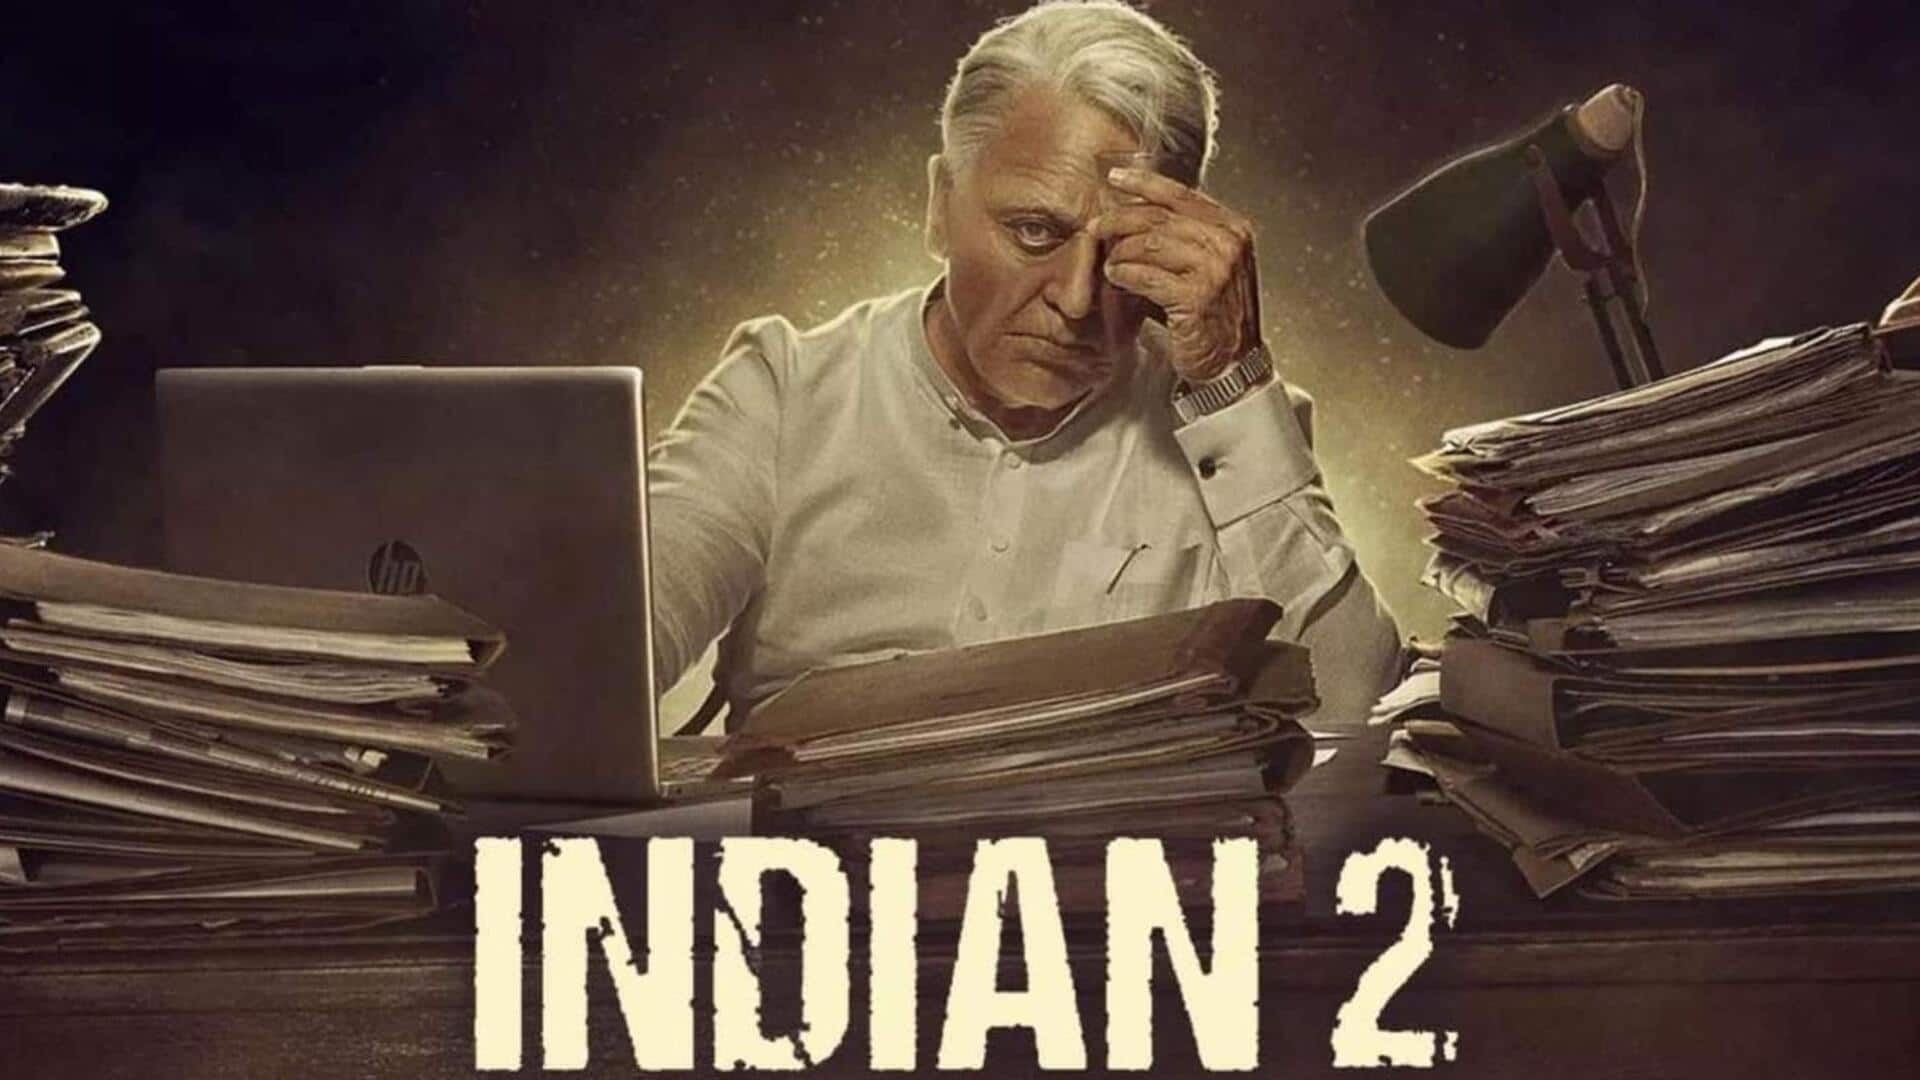 Kamal Haasan's 'Indian 2' 'INTRO' is about hope and resilience